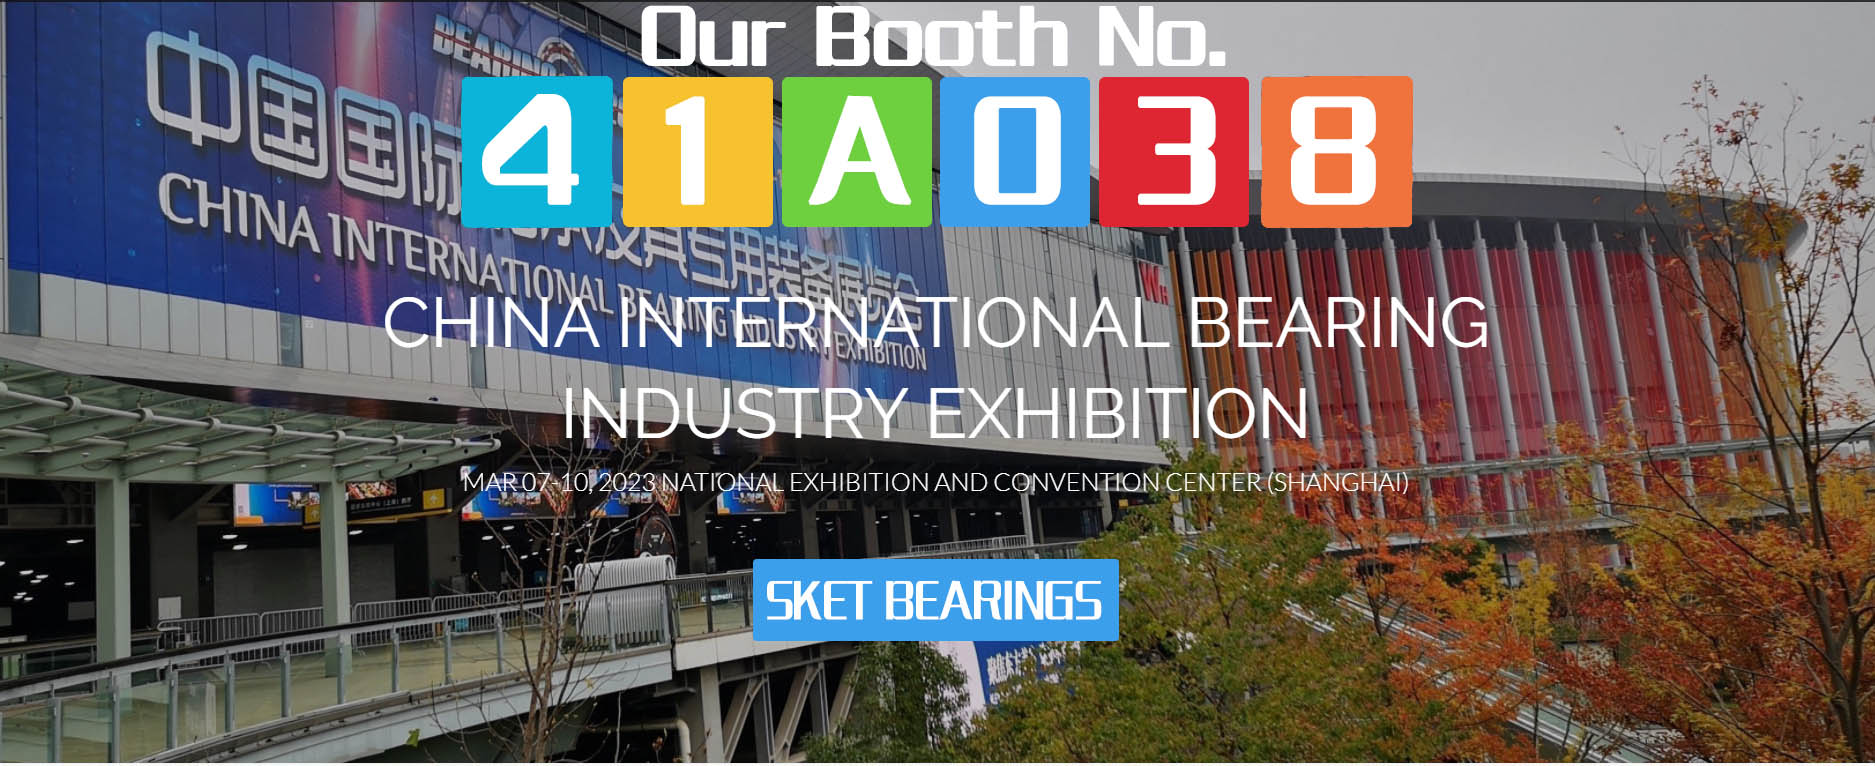 SKET Bearing booth 41A038 of 2022 China International Bearing Industry Exhibition